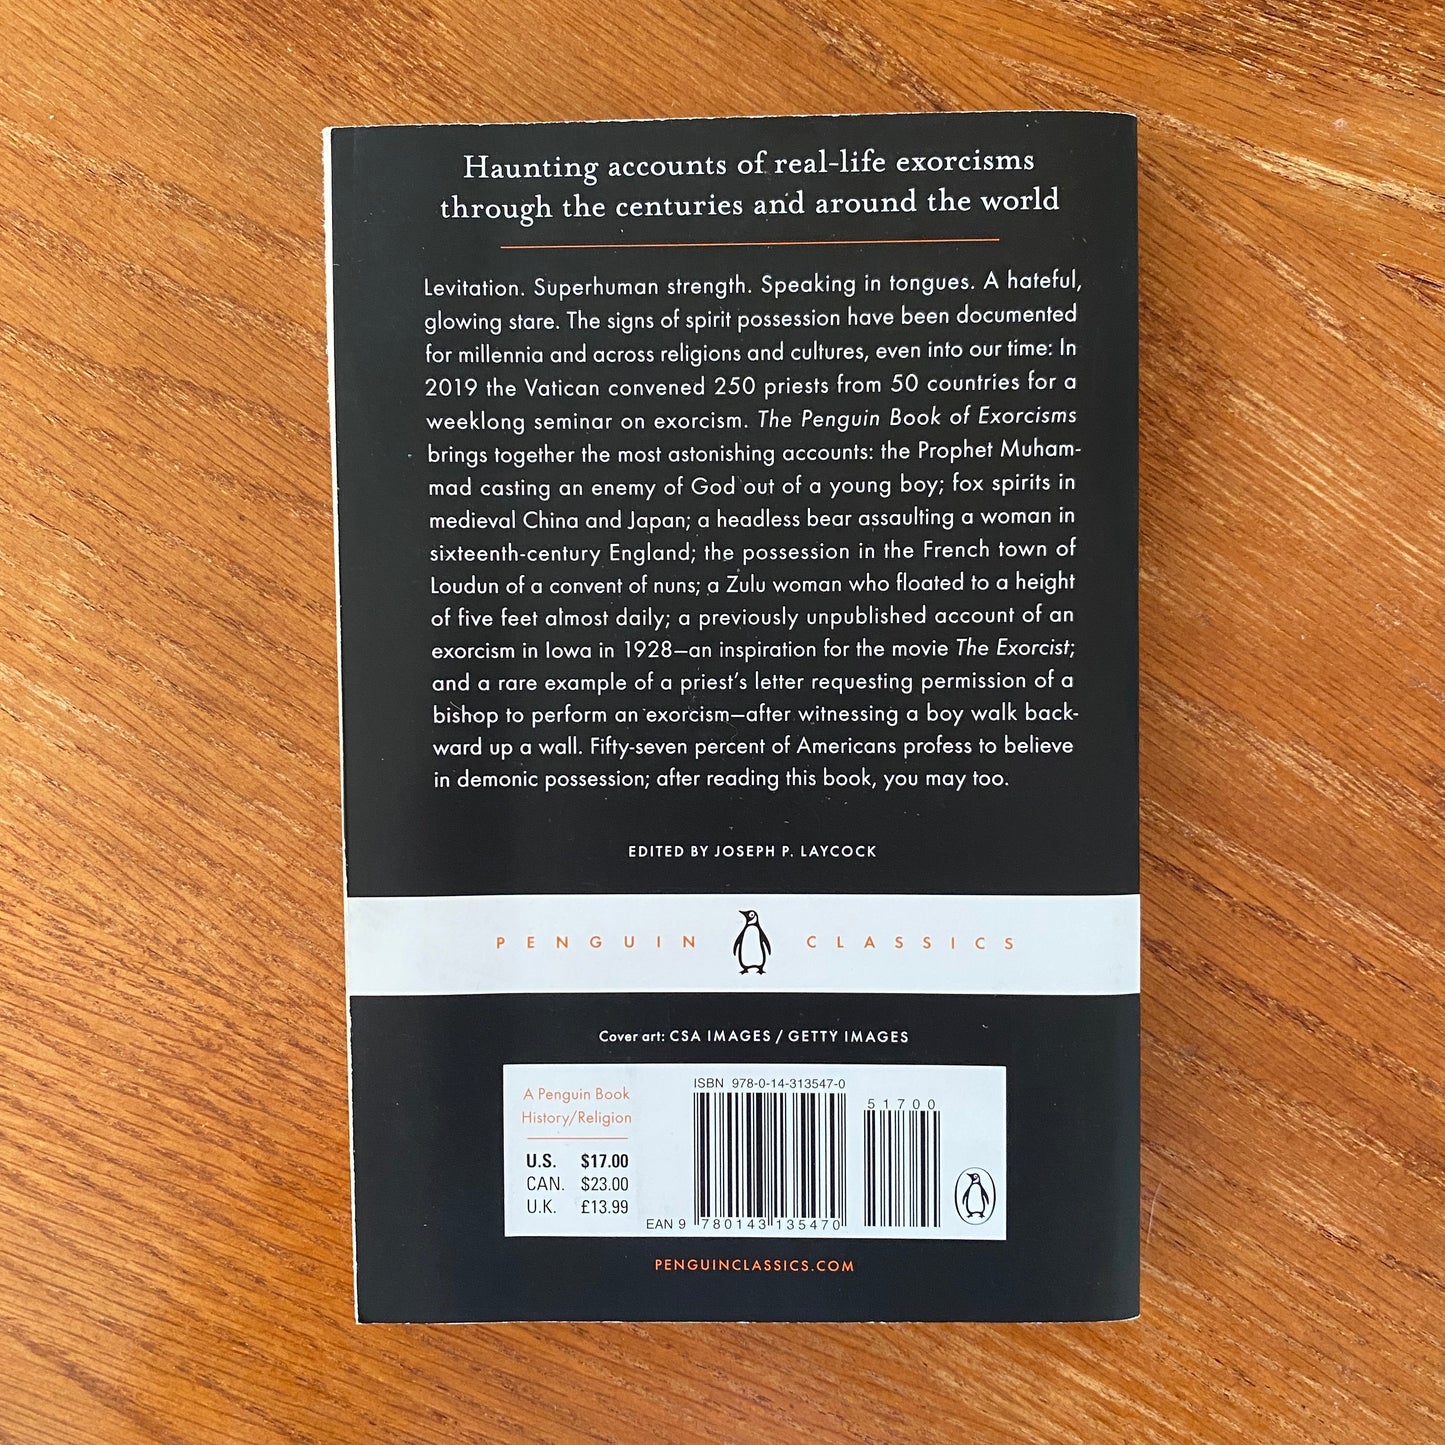 The Penguin Book of Exorcisms - Joseph P. Laycock